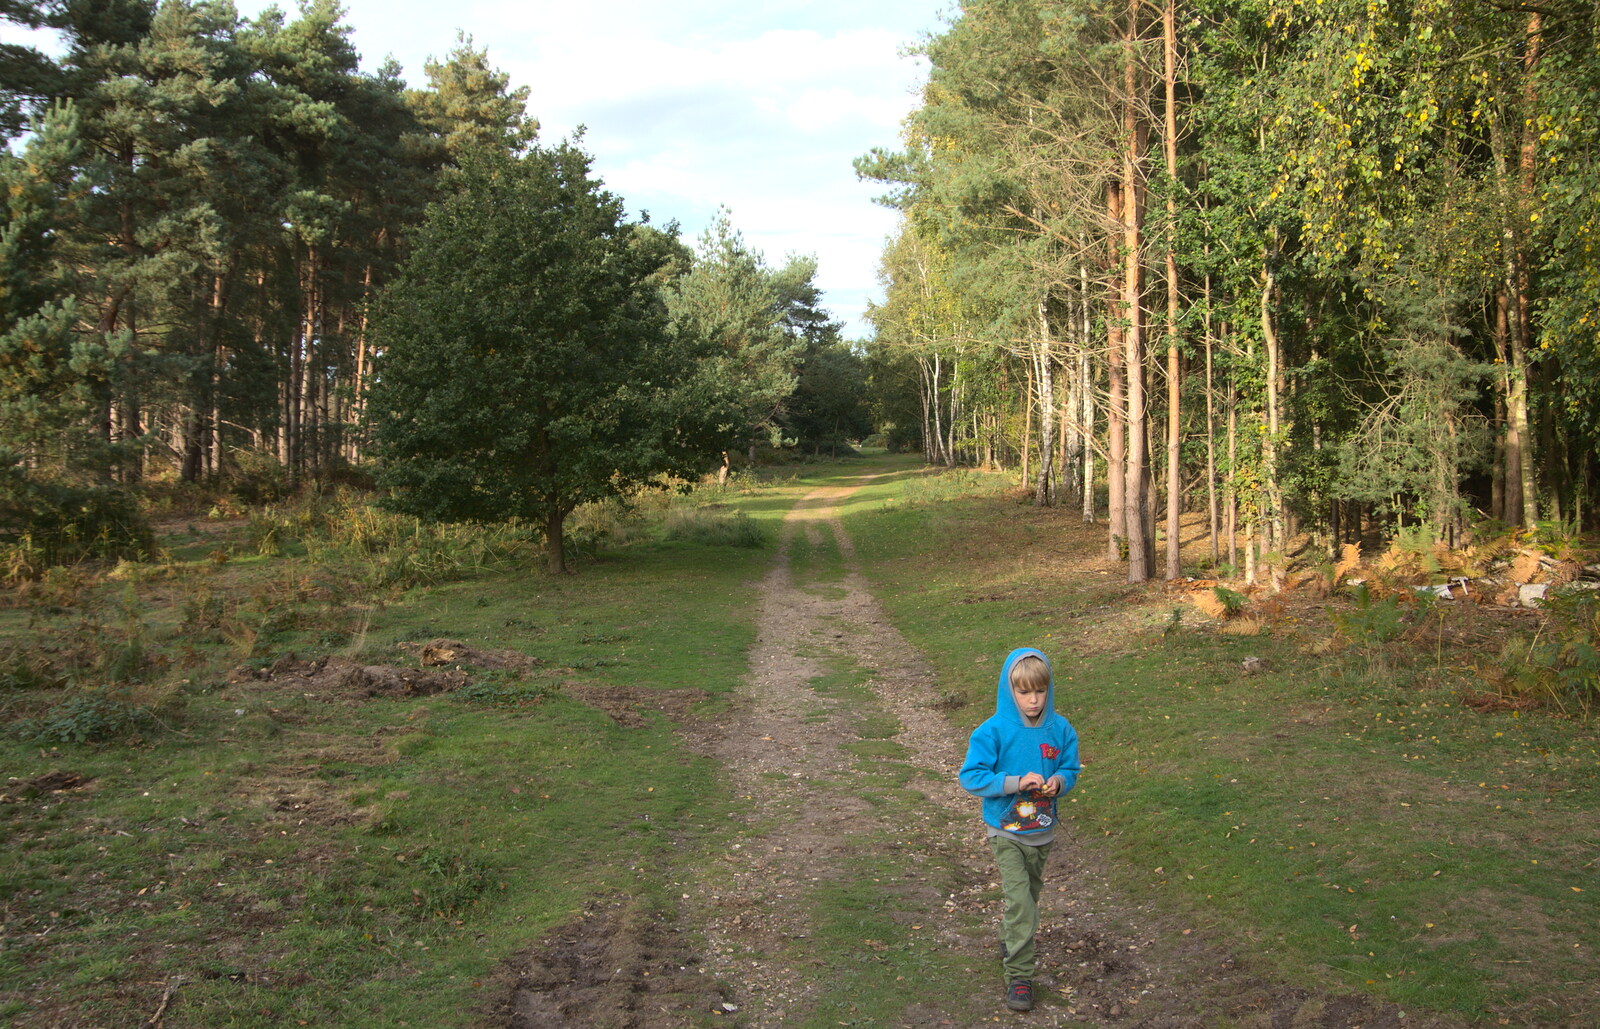 Harry on a path from Evidence of Autumn: Geocaching on Knettishall Heath, Suffolk - 7th October 2018